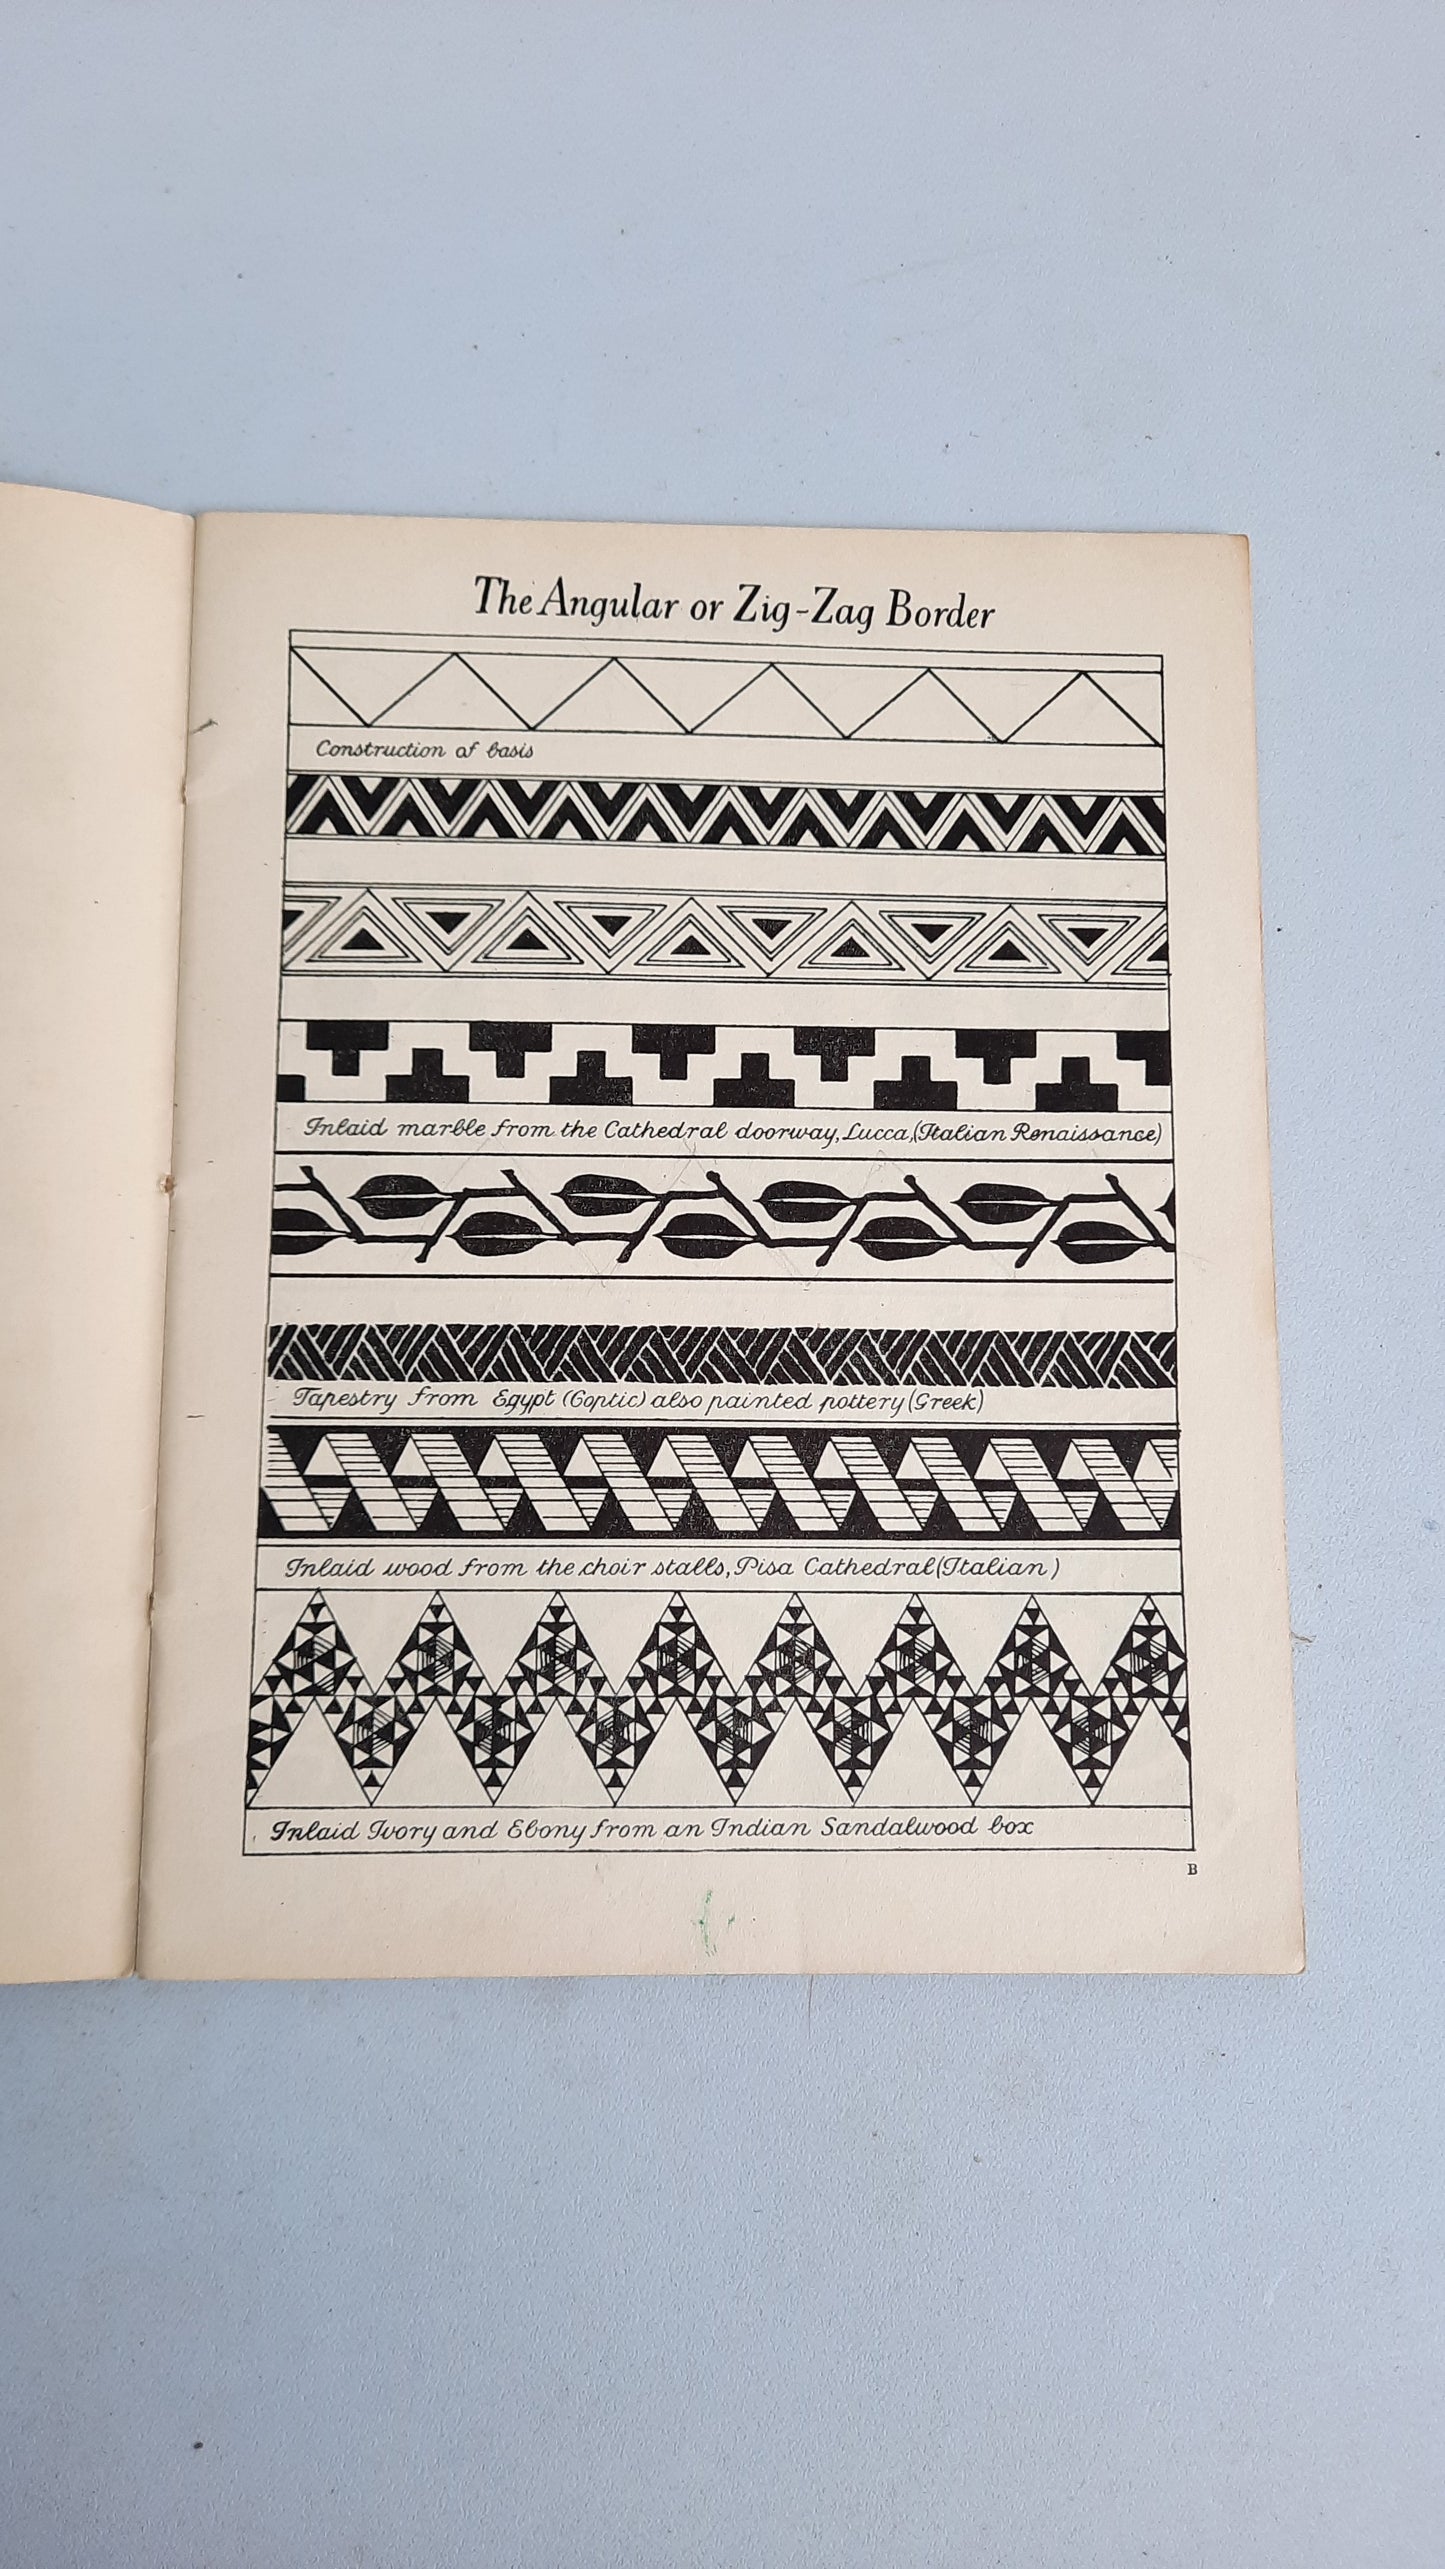 "A First Book of Pattern Design" 1952 by B. Hargreaves